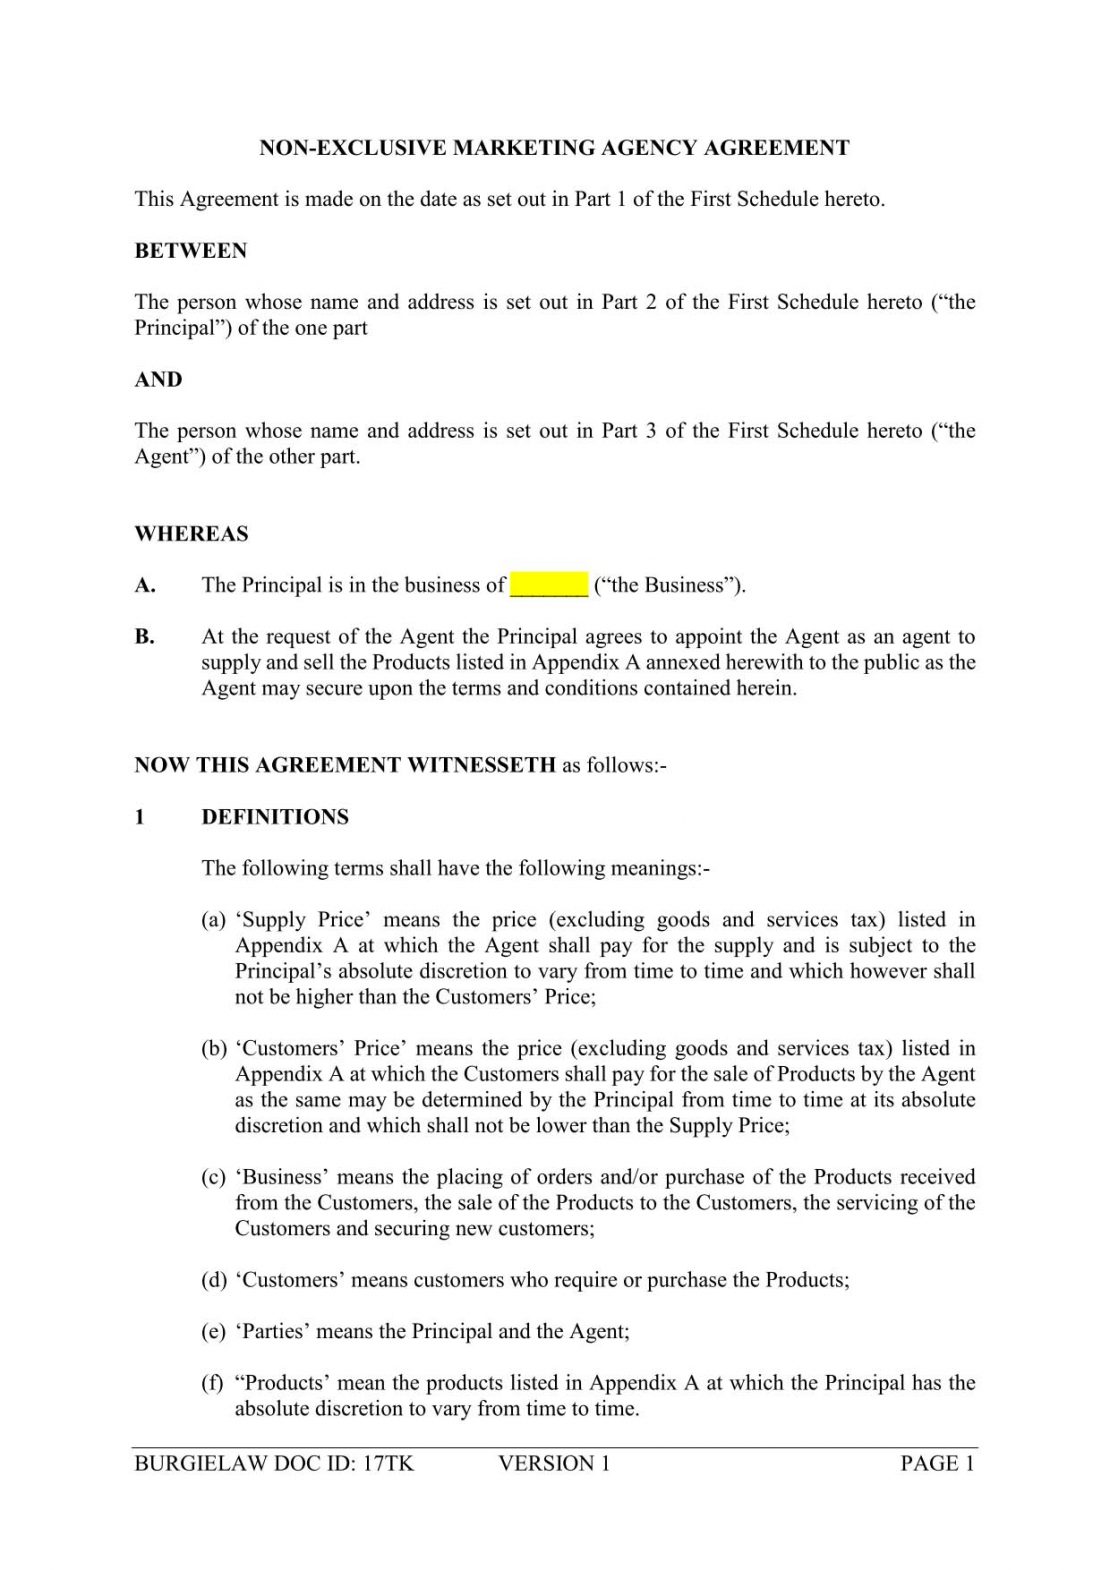 NonExclusive Marketing Agency Agreement Template BurgieLaw